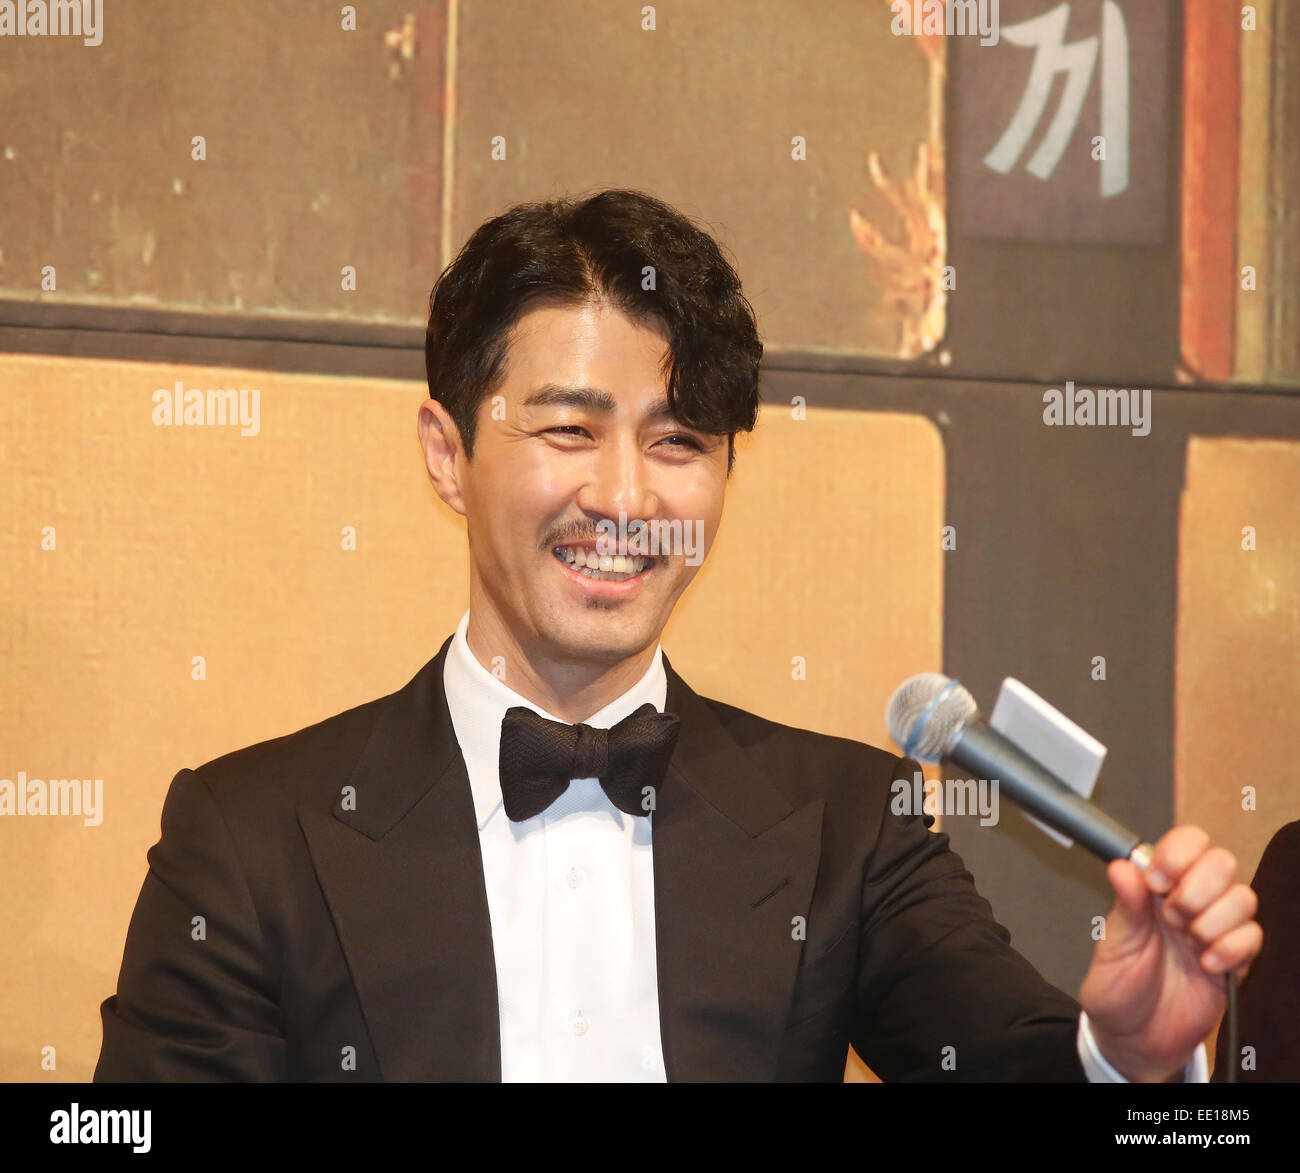 Cha Seung-Won, Jan 09, 2015 : South Korean actor Cha Seung-Won attends a press conference for 'Three Meals A Day', a variety show of tvN, CJ E&M, in Seoul, South Korea. © Lee Jae-Won/AFLO/Alamy Live News Stock Photo